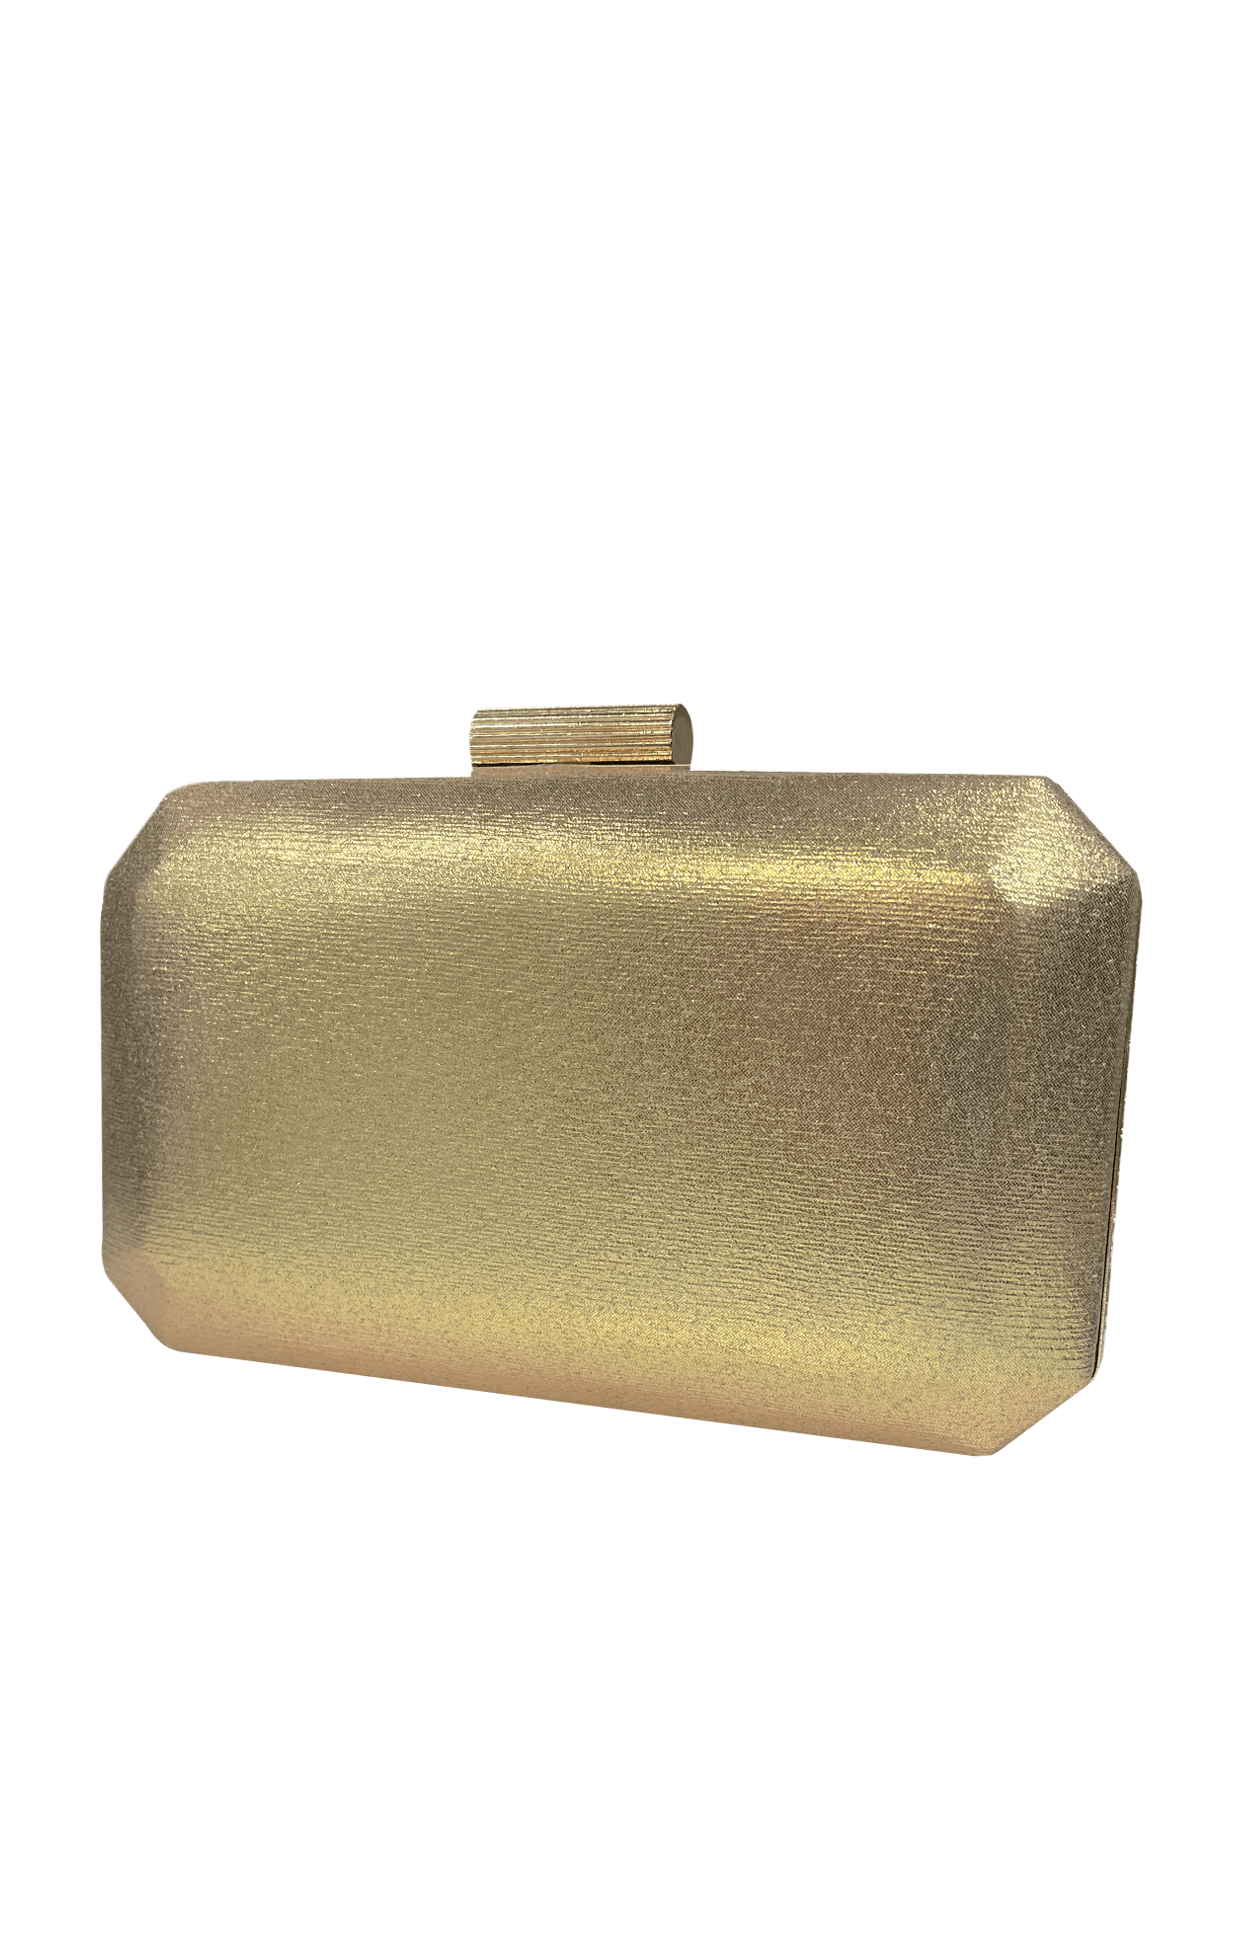 ACCESSORIES Bags Clutches One Size / Neutral DIAMANTE MESH STRUCTURED CLUTCH IN GOLD